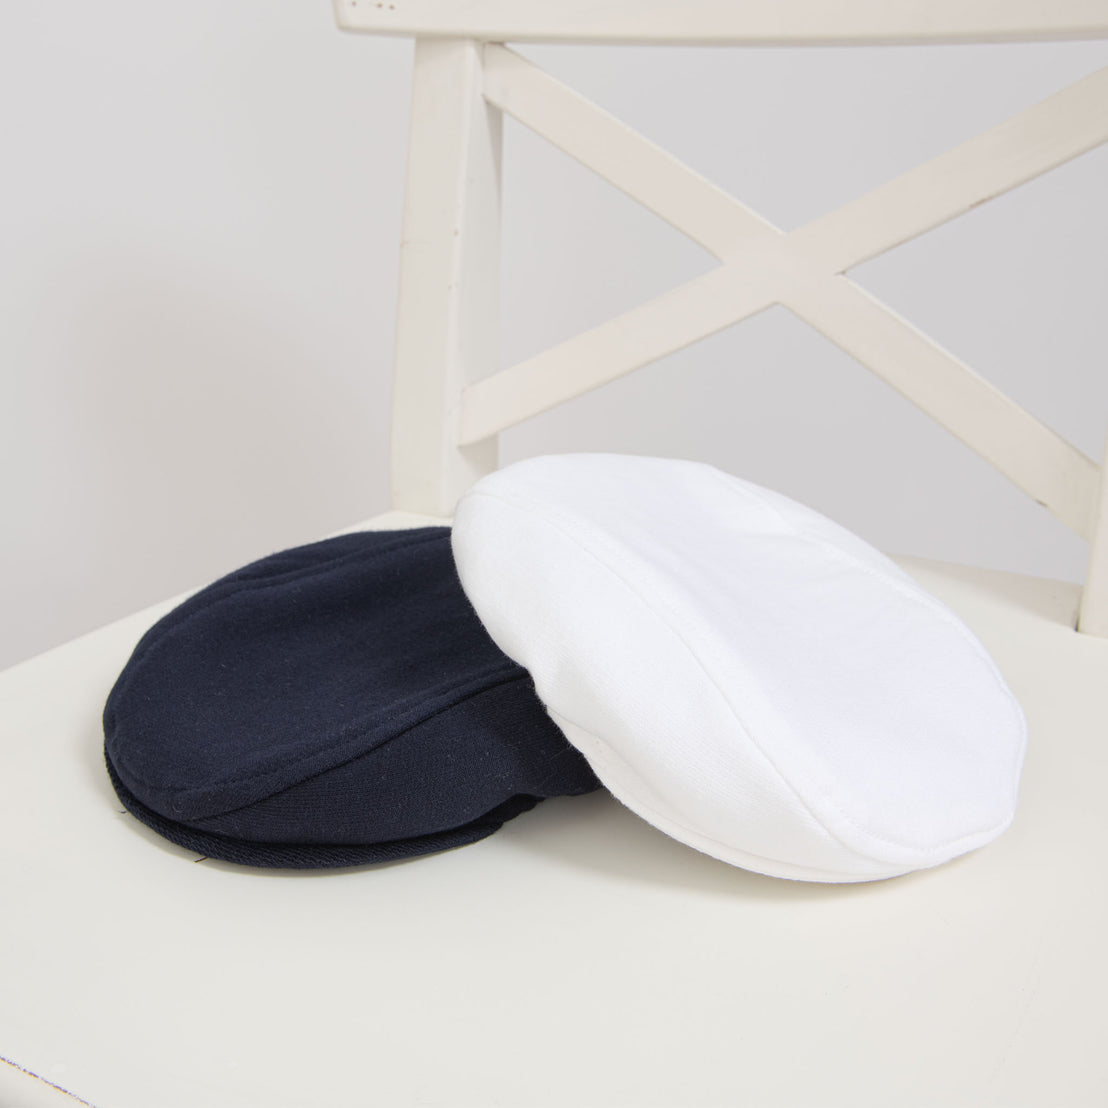 Flat lay photo of the Elliott Newsboy Caps: one in navy and the other in white french terry cotton.